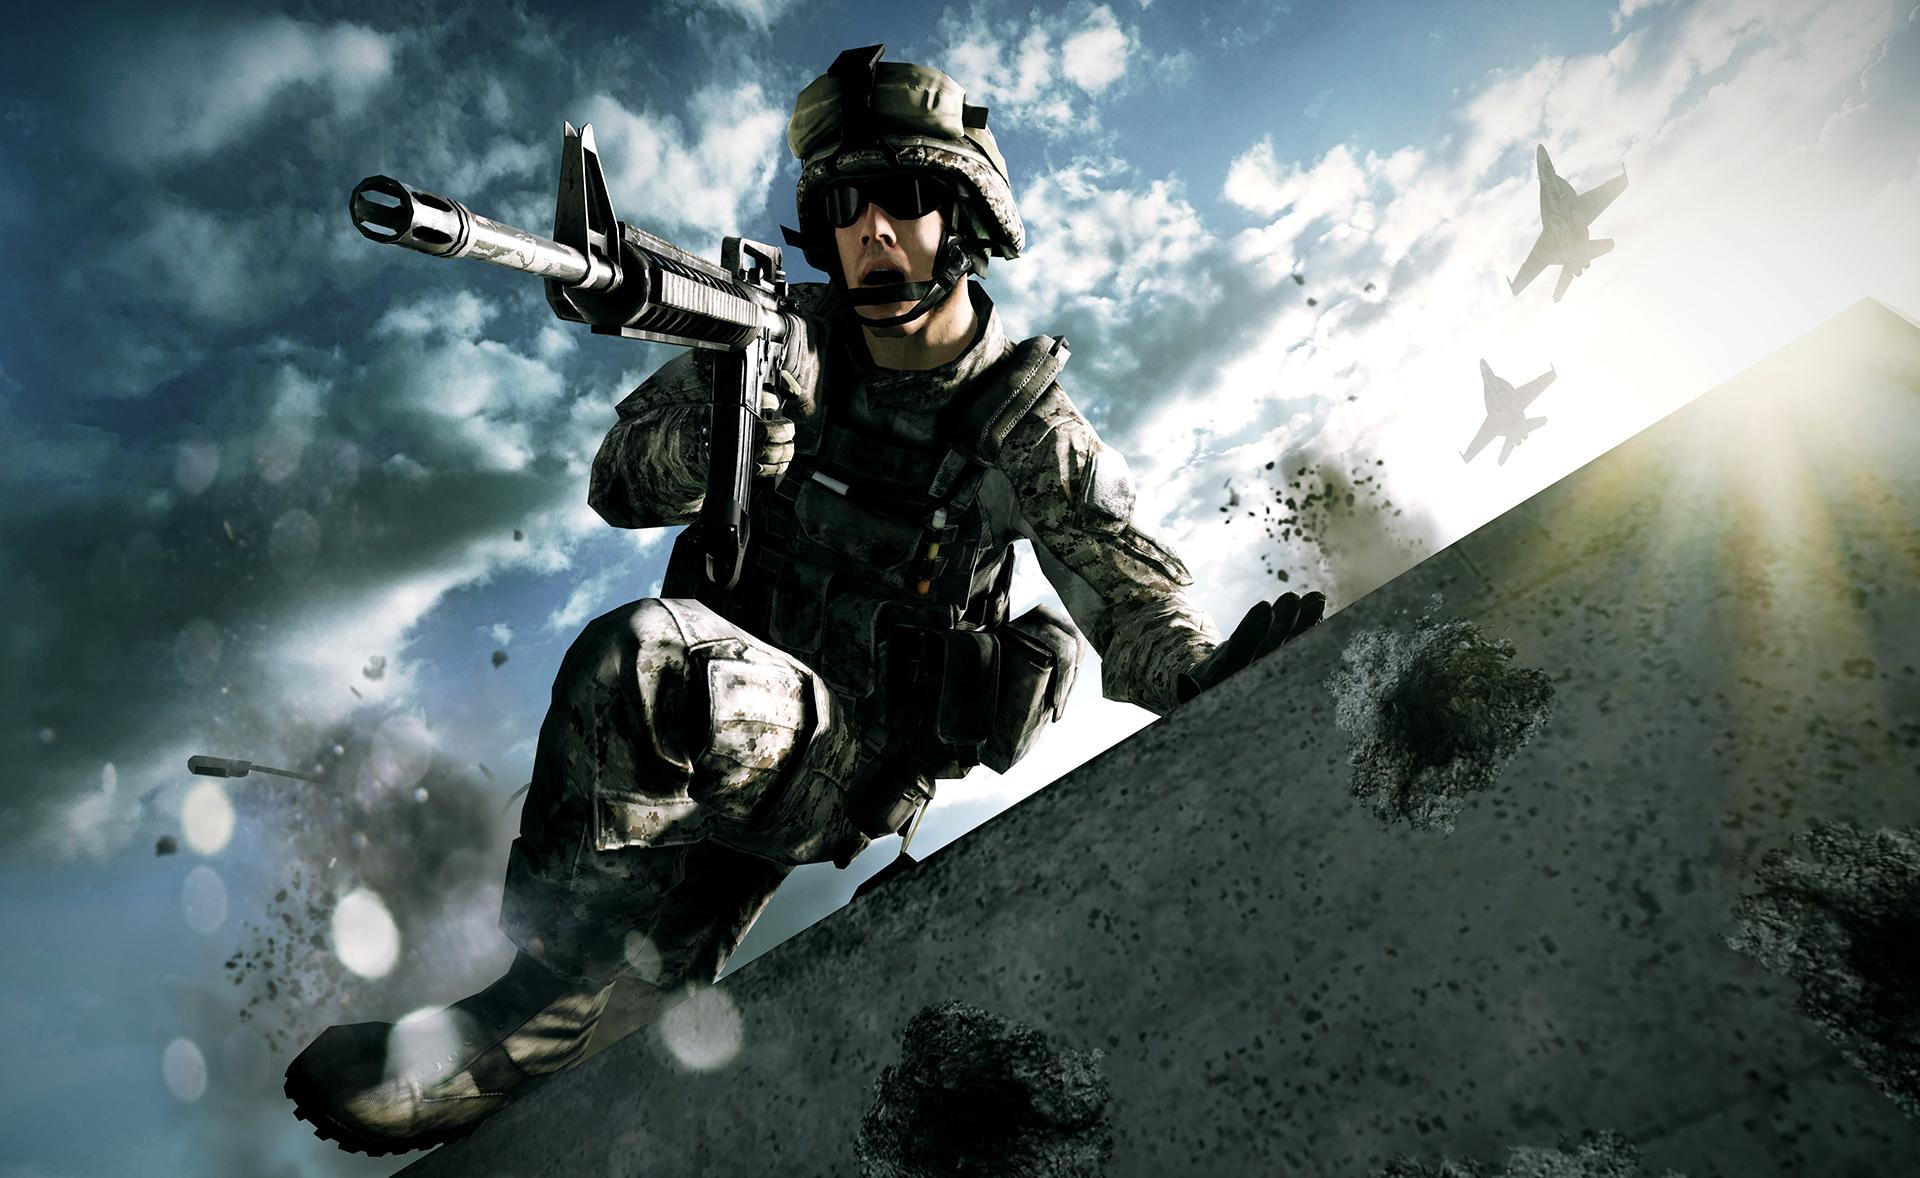 Cool Army Anction Android Wallpaper With